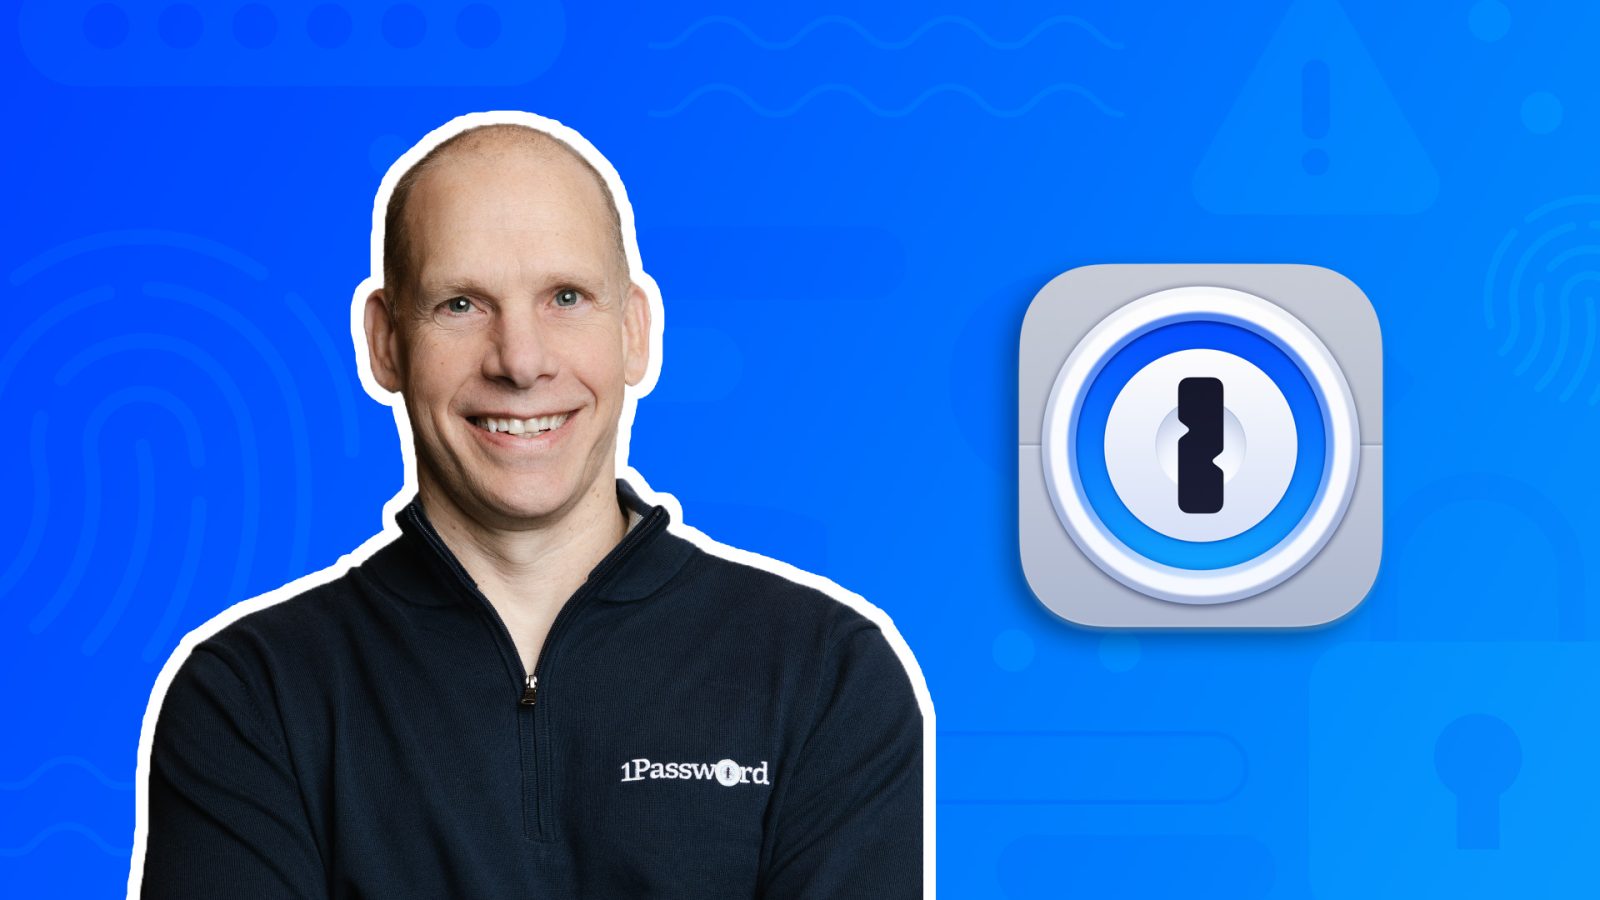 Exclusive interview: 1Password CEO talks about the future of password managers with passkeys